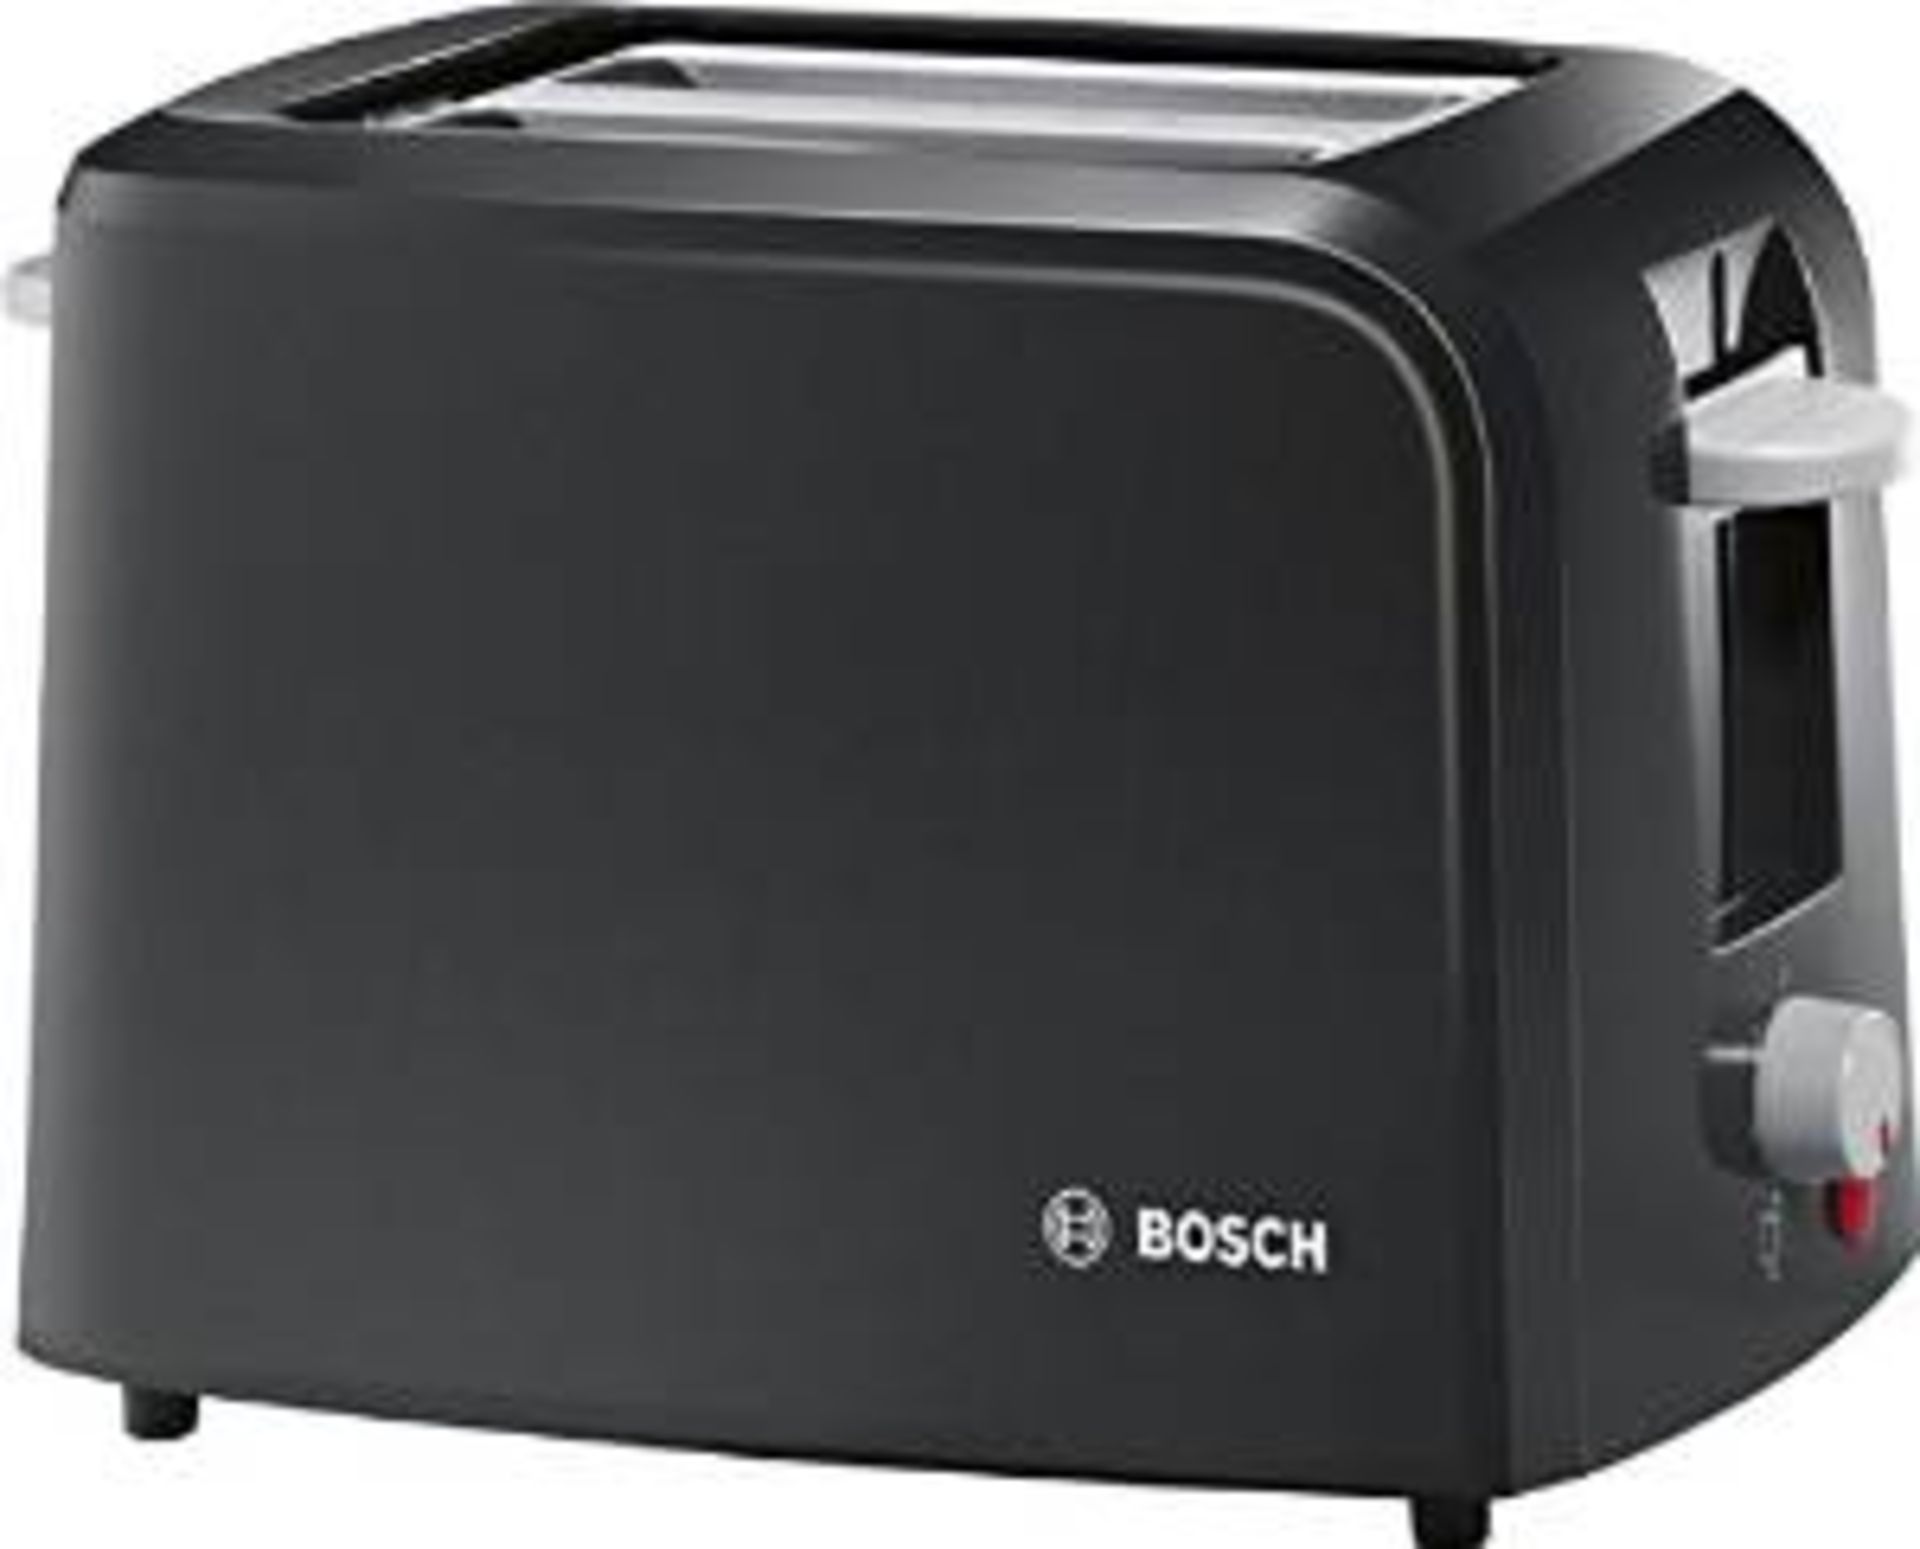 V Brand New Bosch Toaster with pop up bun warmer and crumb tray (Black) ISP £19.99 (Amazon)